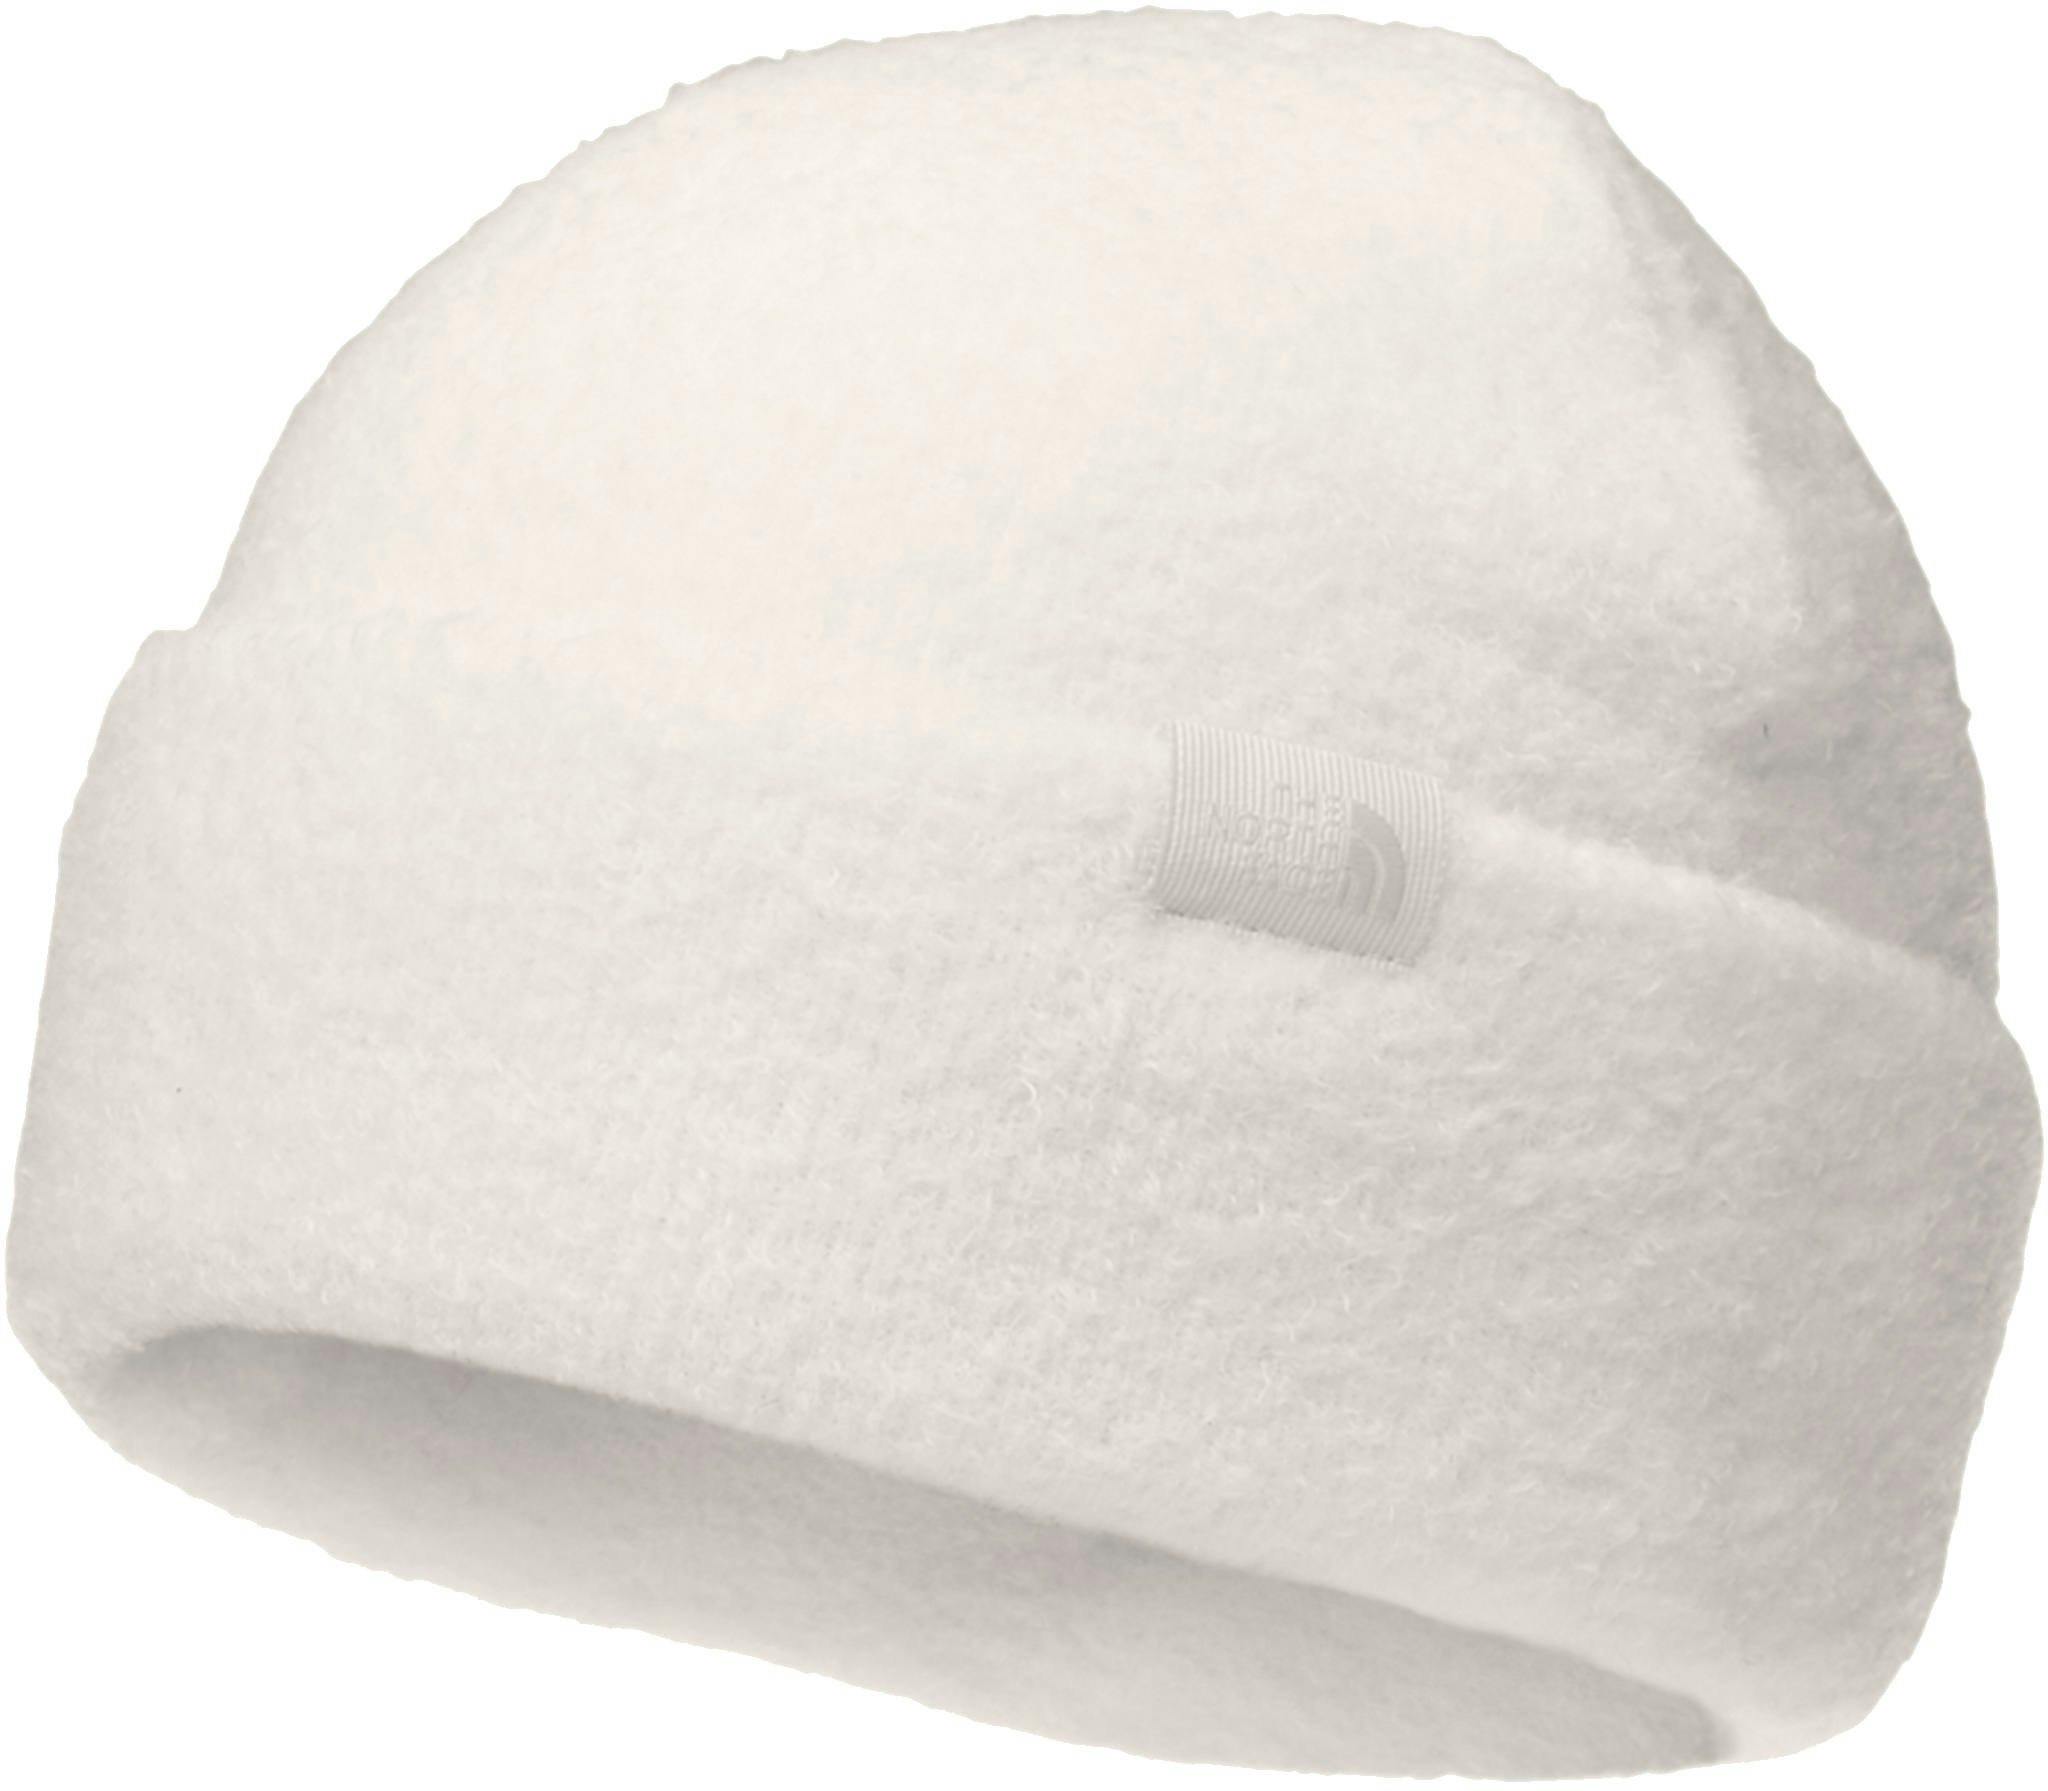 Product image for City Plush Beanie - Women’s